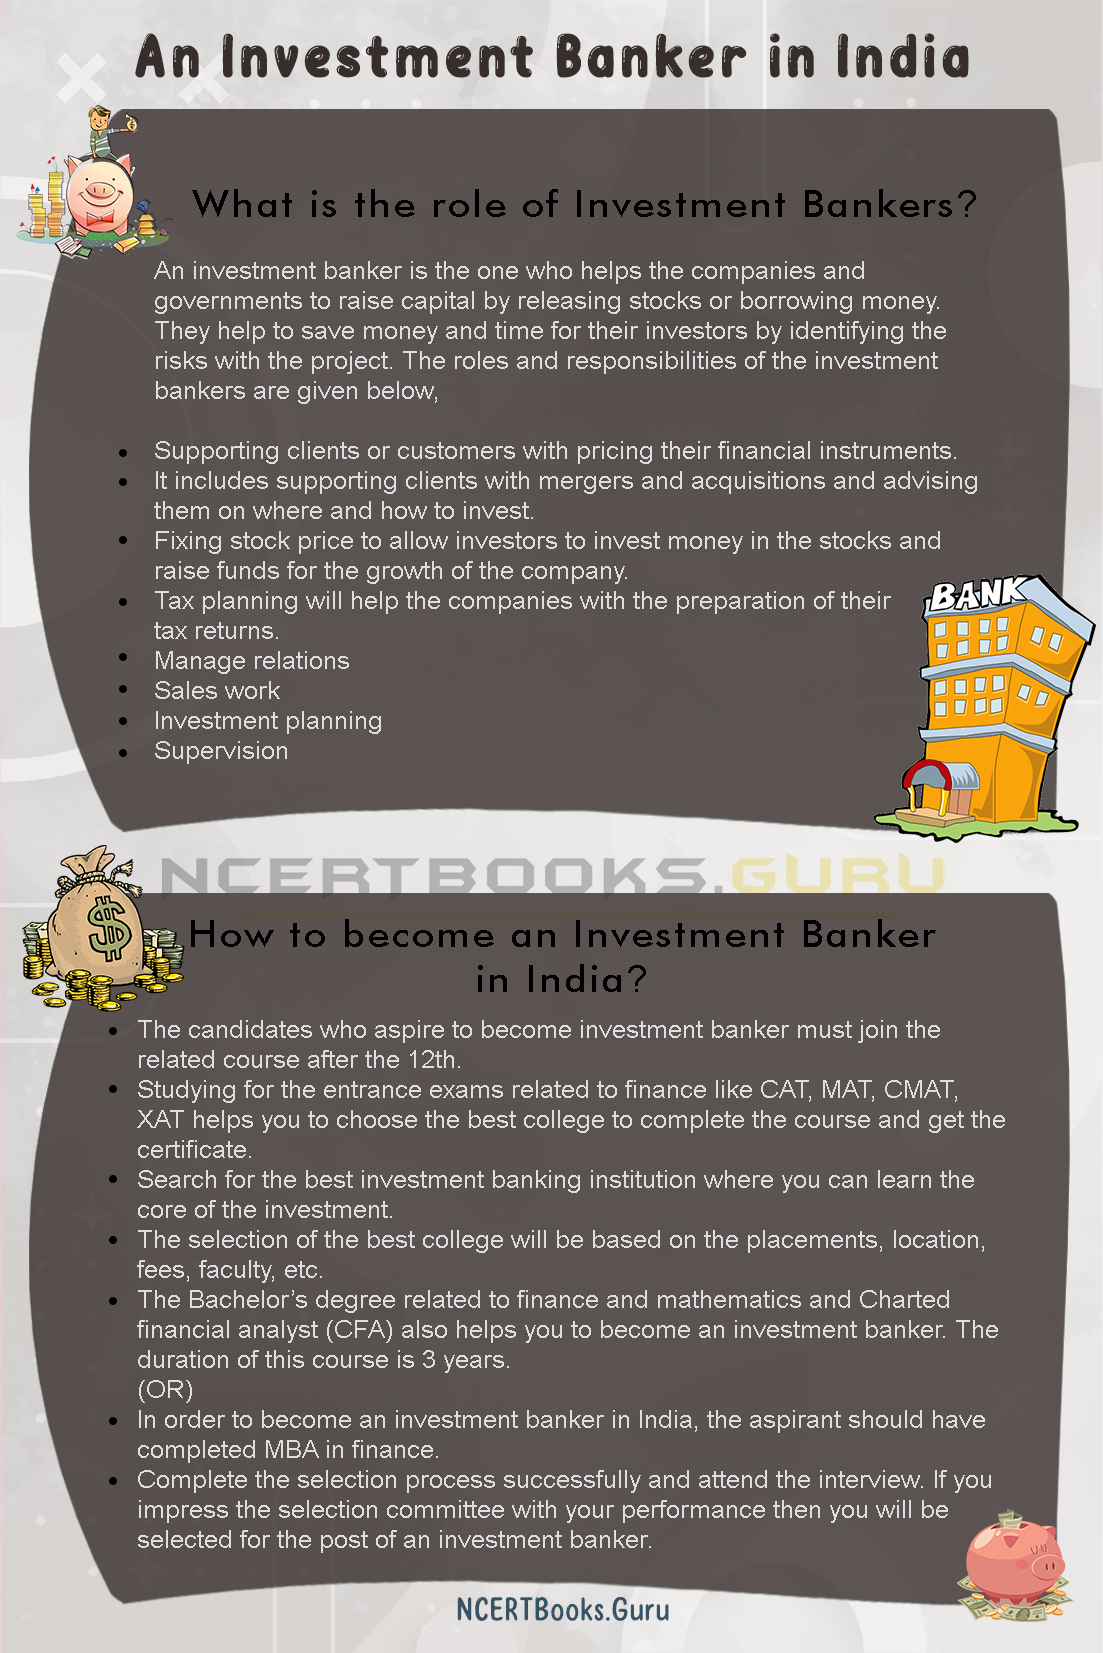 How to become an Investment Banker in India 1